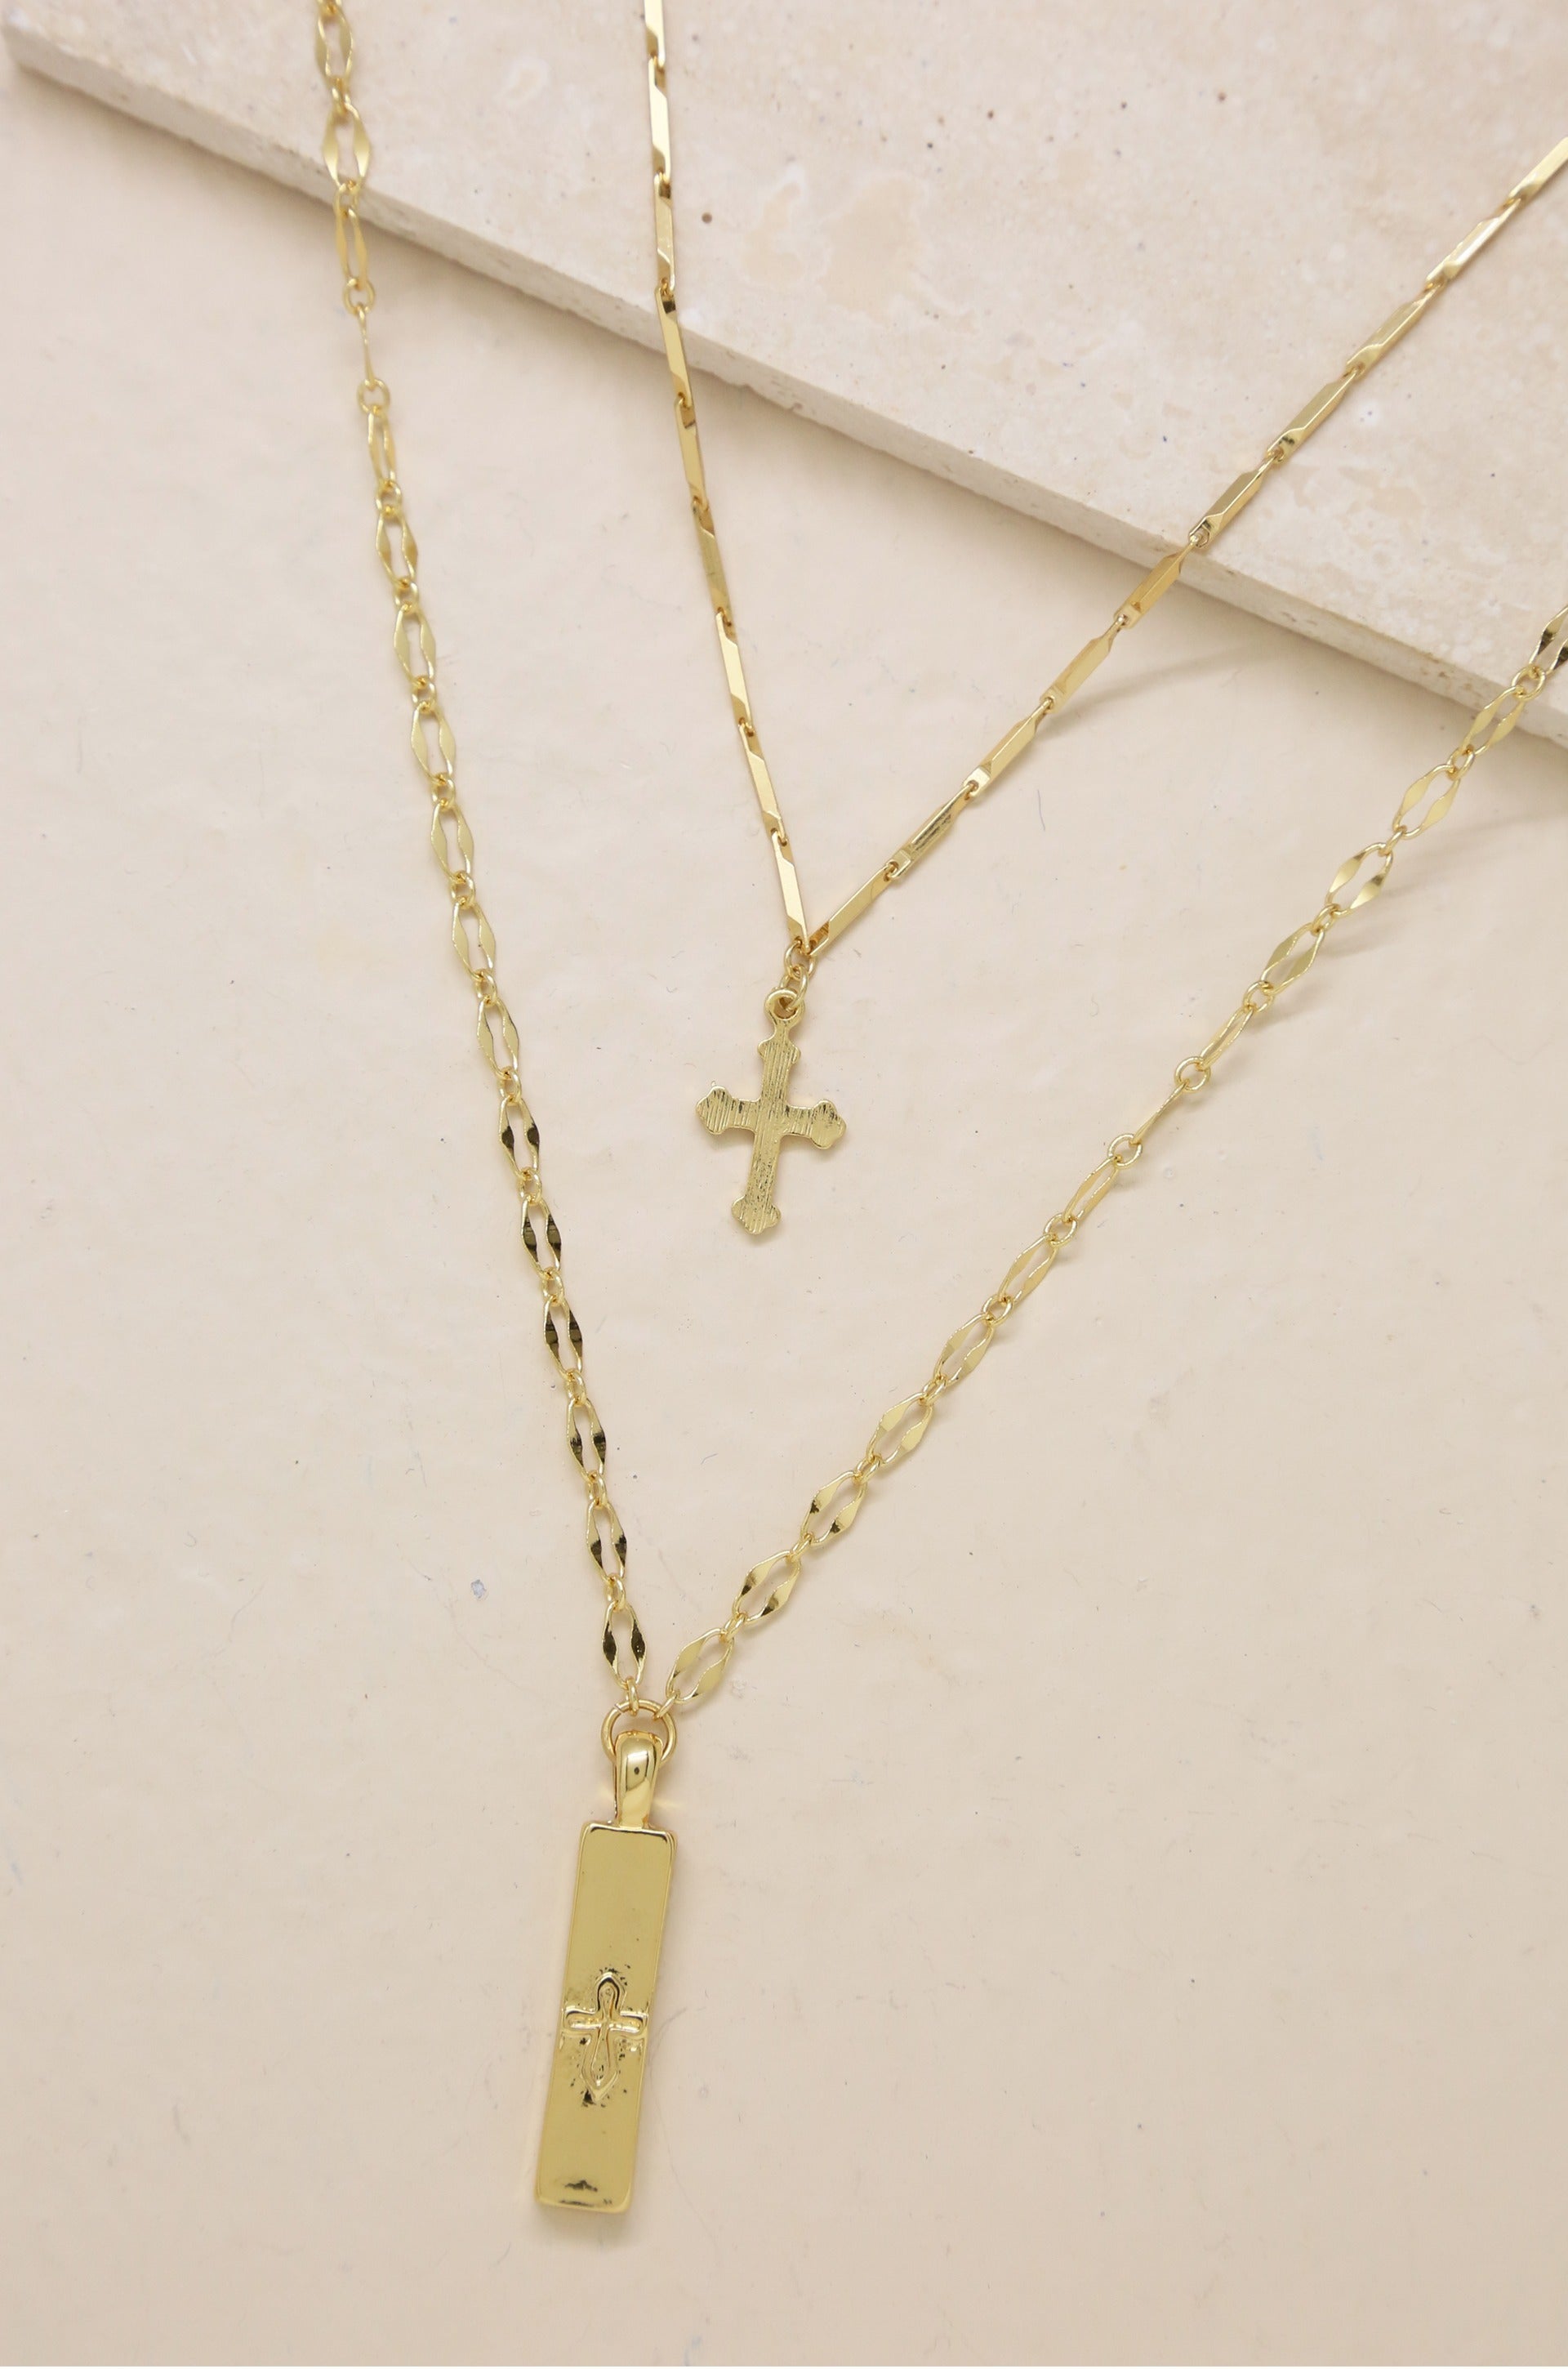 Your Highness 18k Gold Plated Cross Necklace Set on slate